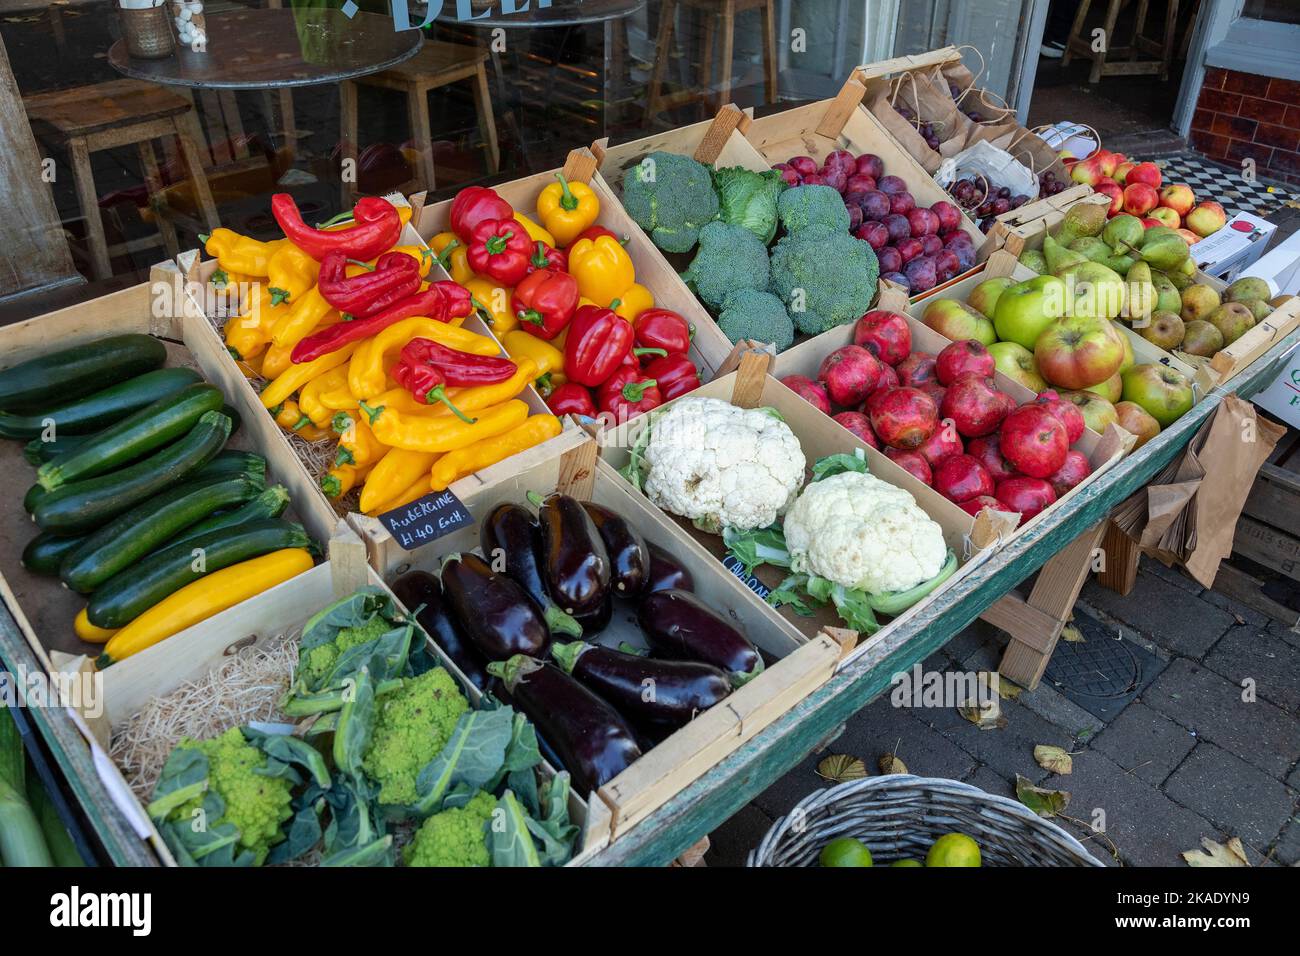 Display of fruit and vegetables, grocery, Shoreham by Sea, England, Great Britain Stock Photo